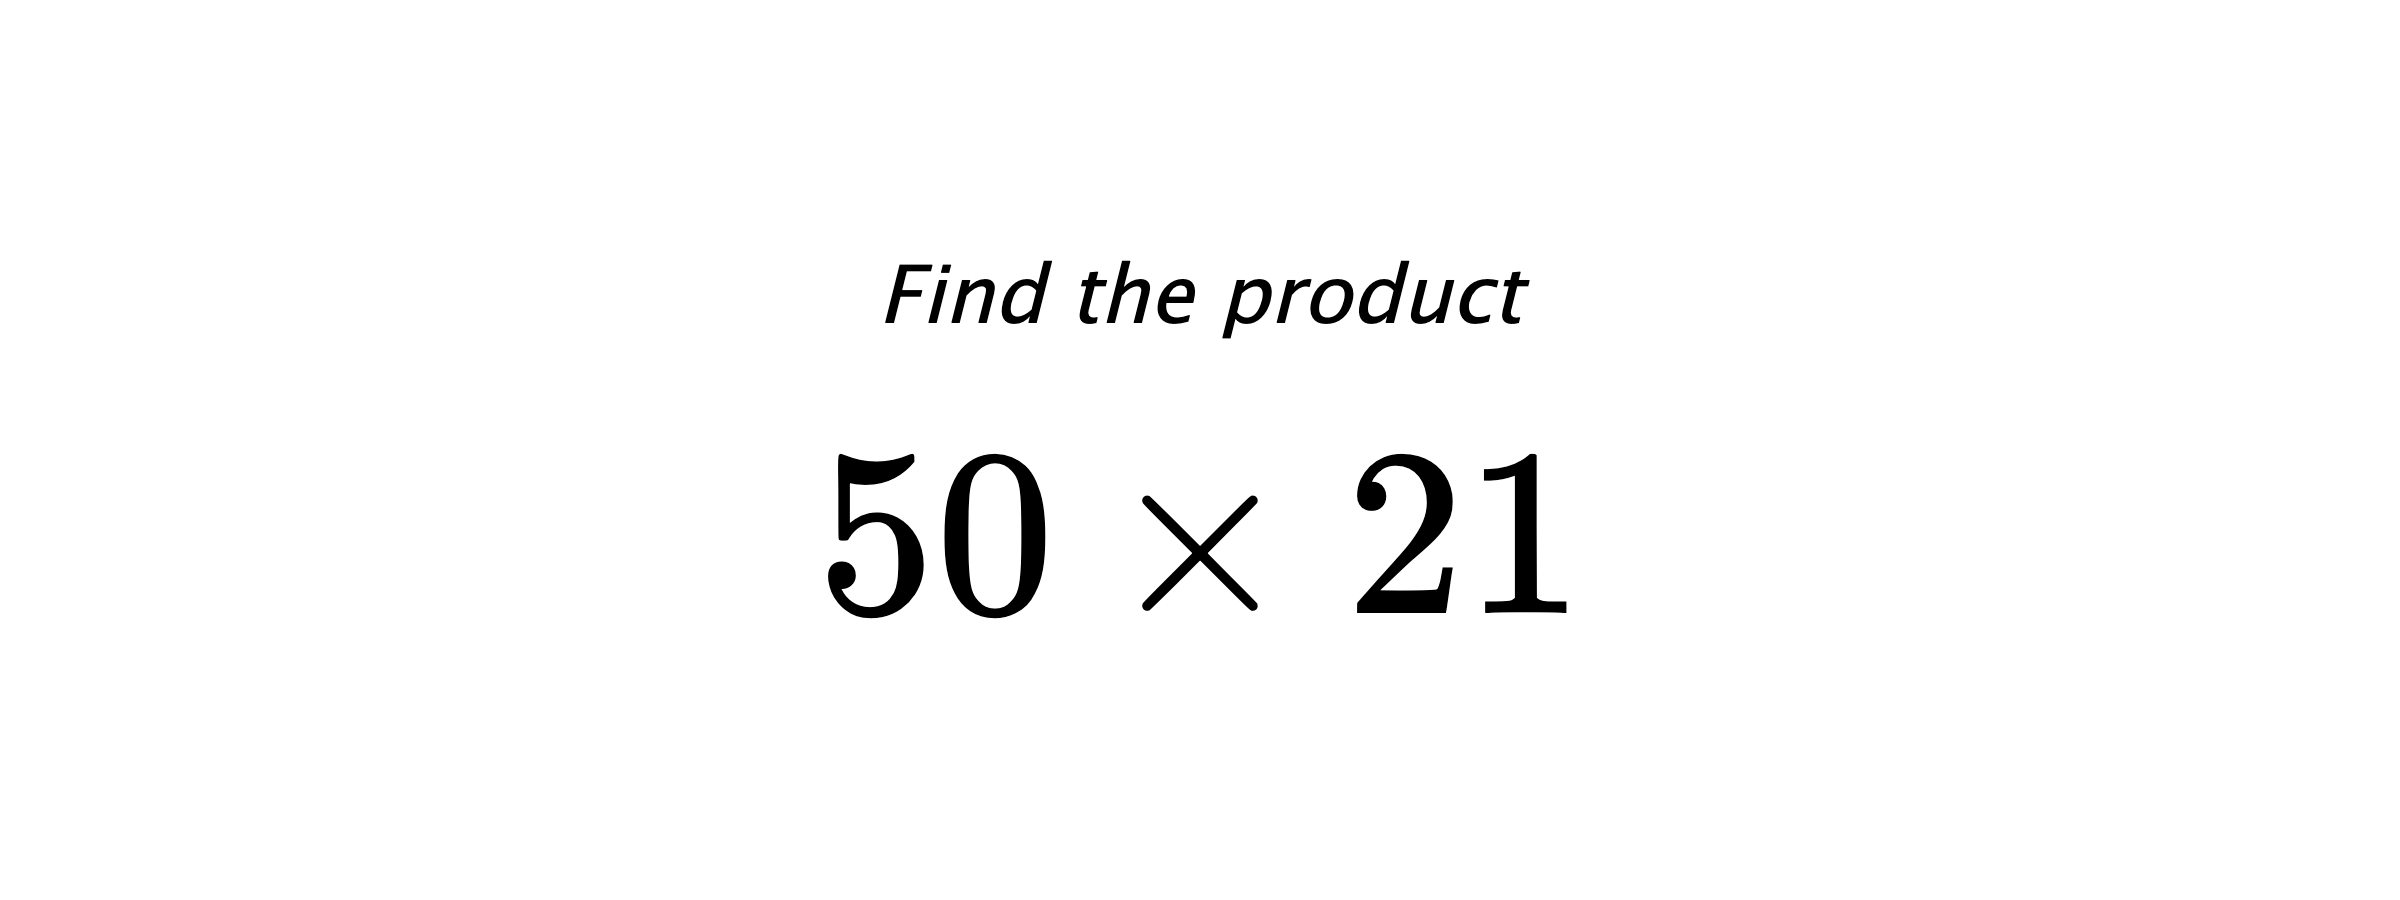 Find the product $ 50 \times 21 $